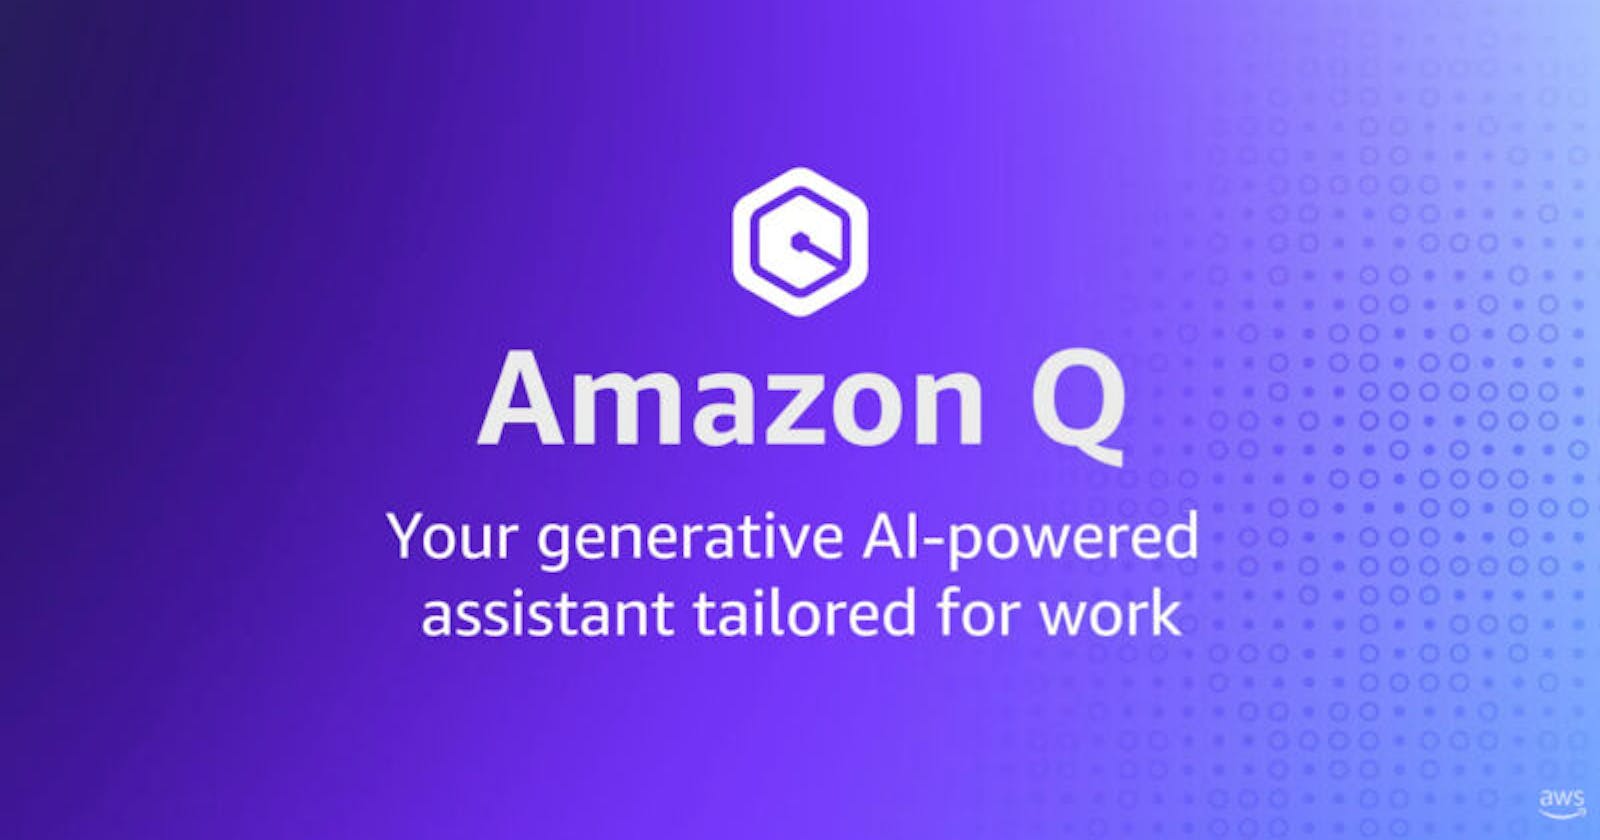 Amazon Q: Unleashing the Power of AI to Transform Workflows and Empower Organizations